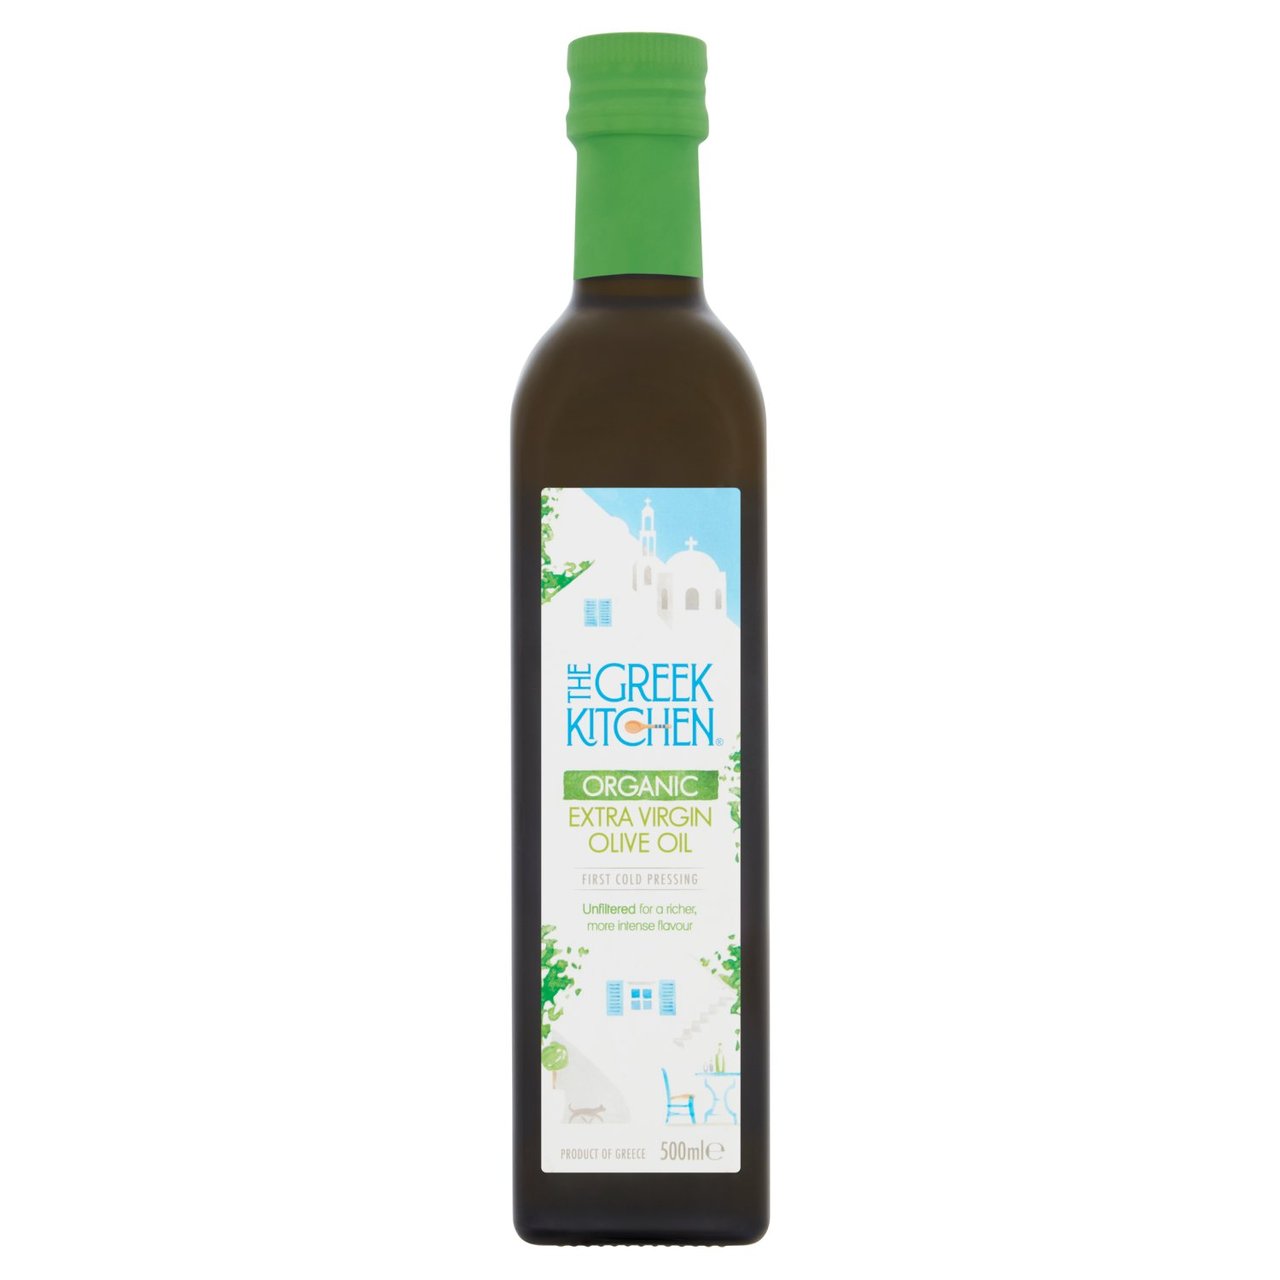 The Greek Kitchen Organic Unfiltered Extra Virgin Olive Oil